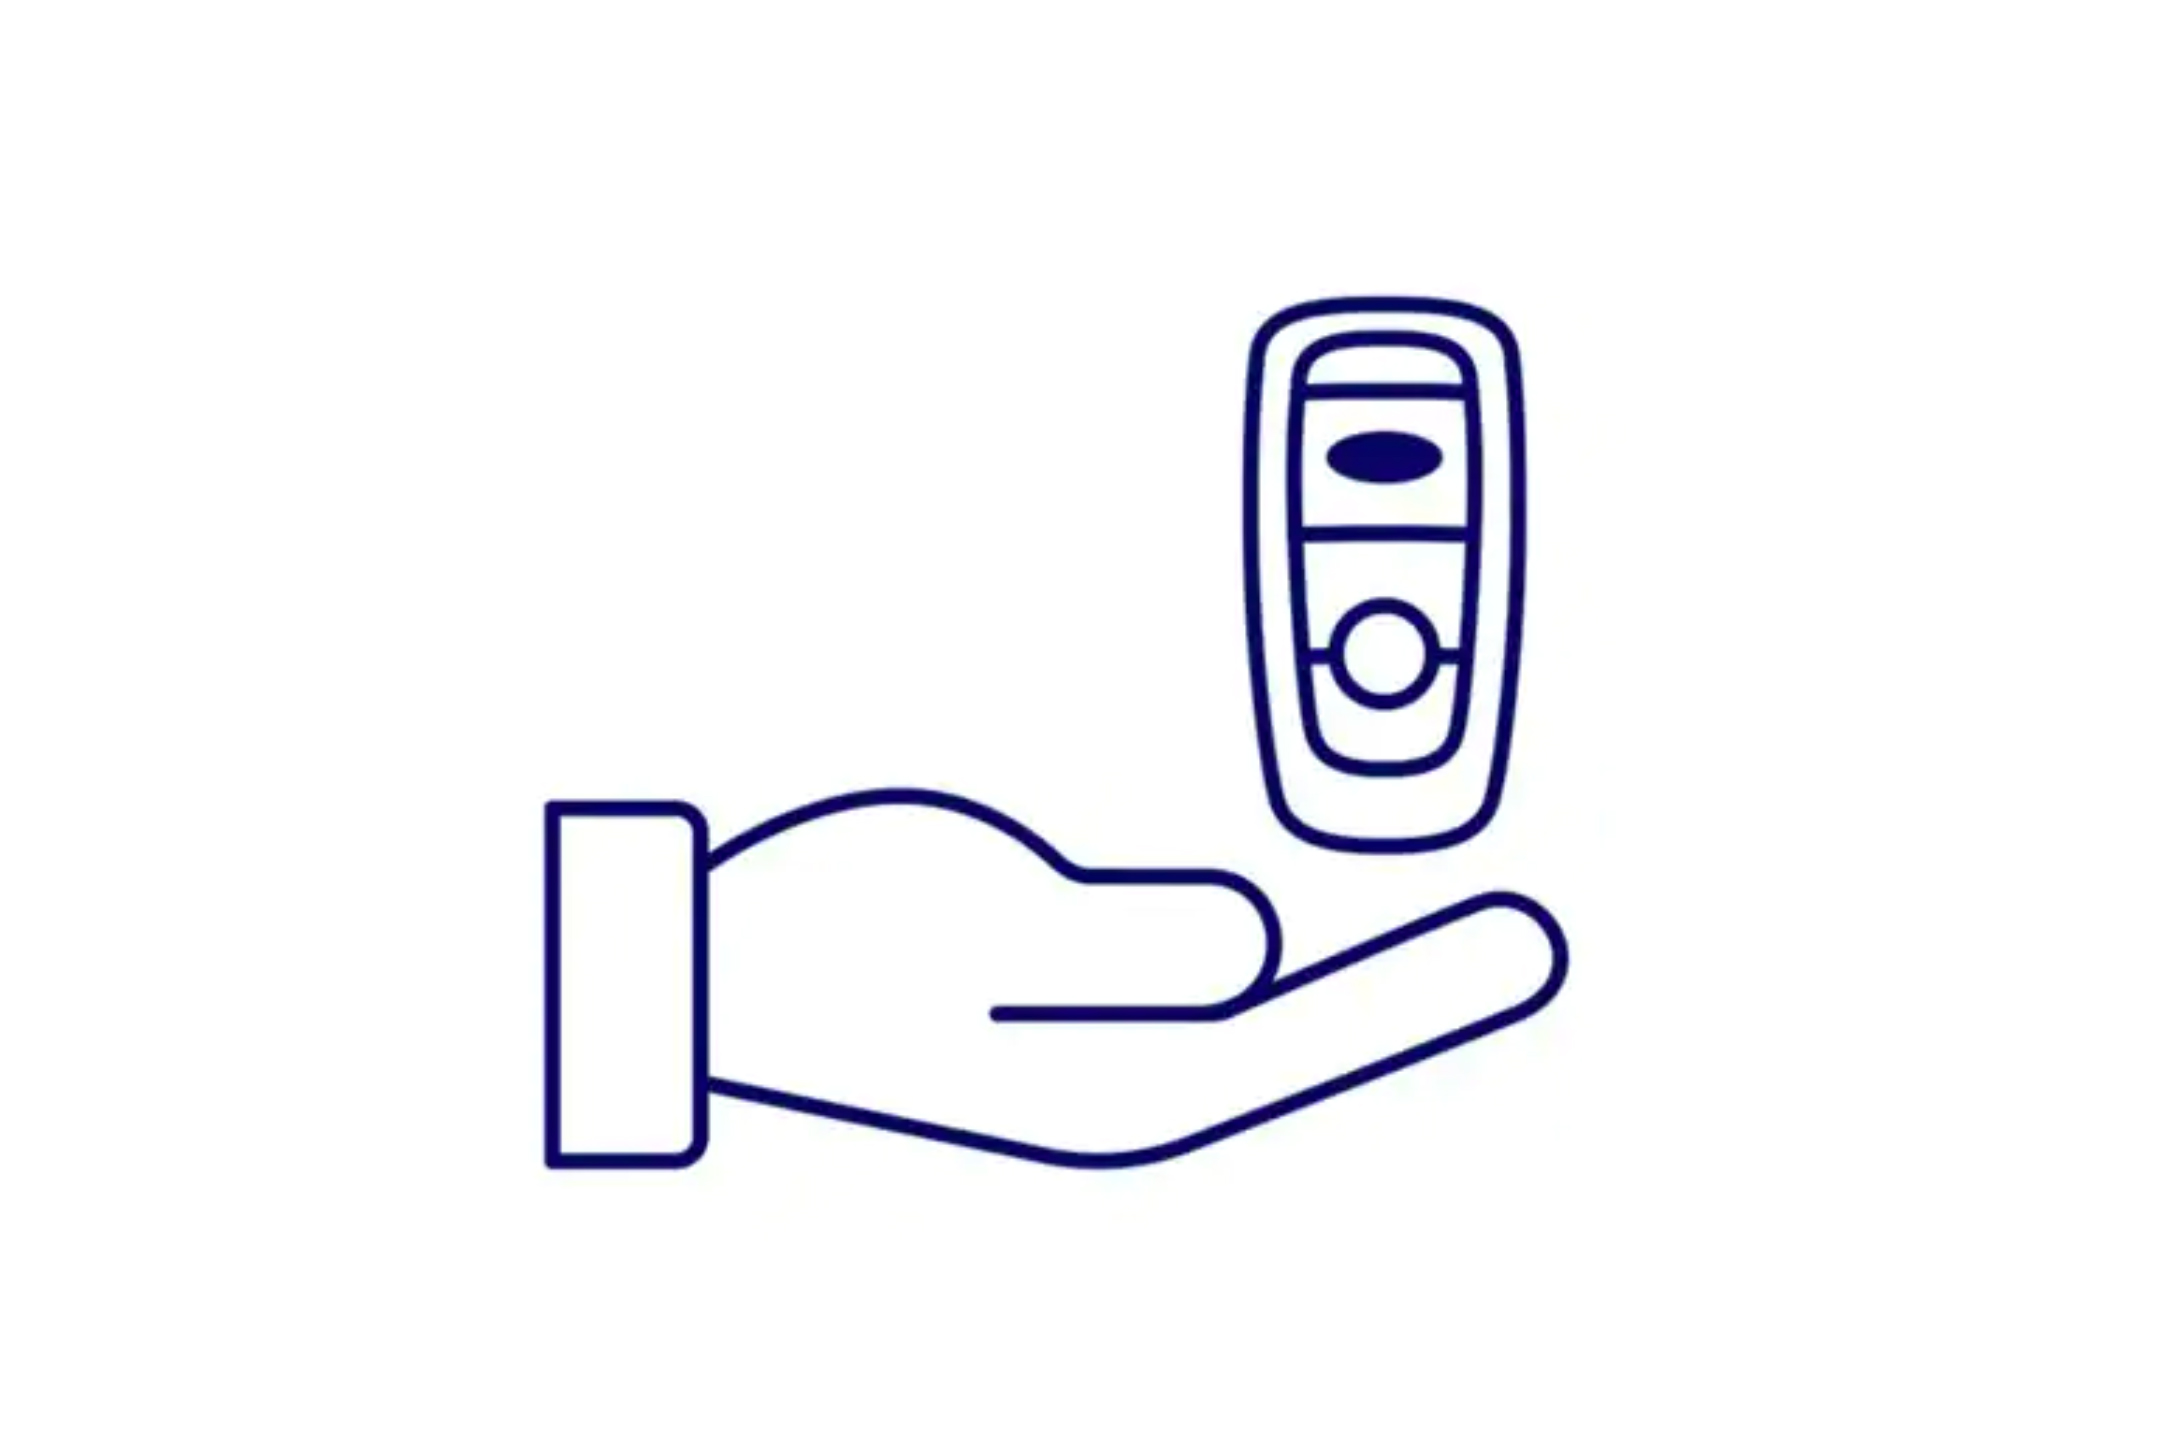 Icon drawing of key fob above a hand